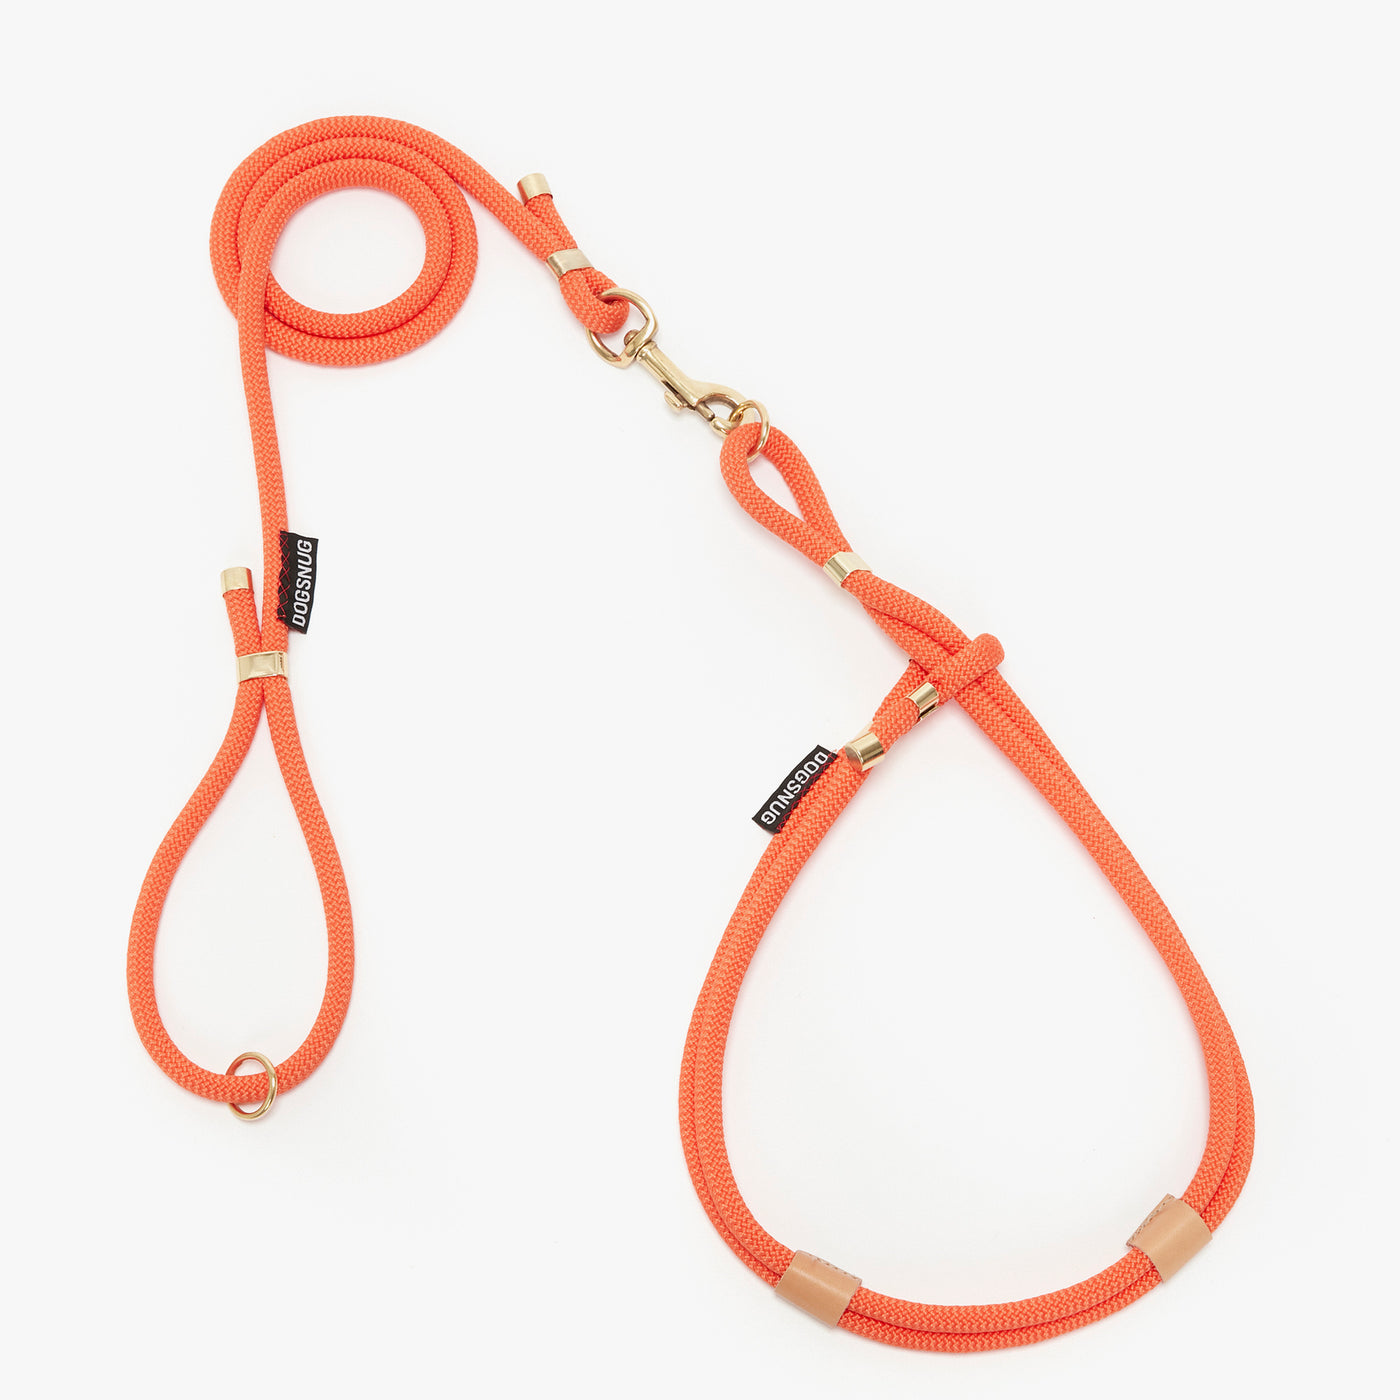 DOg rope harness in orange with matching lead